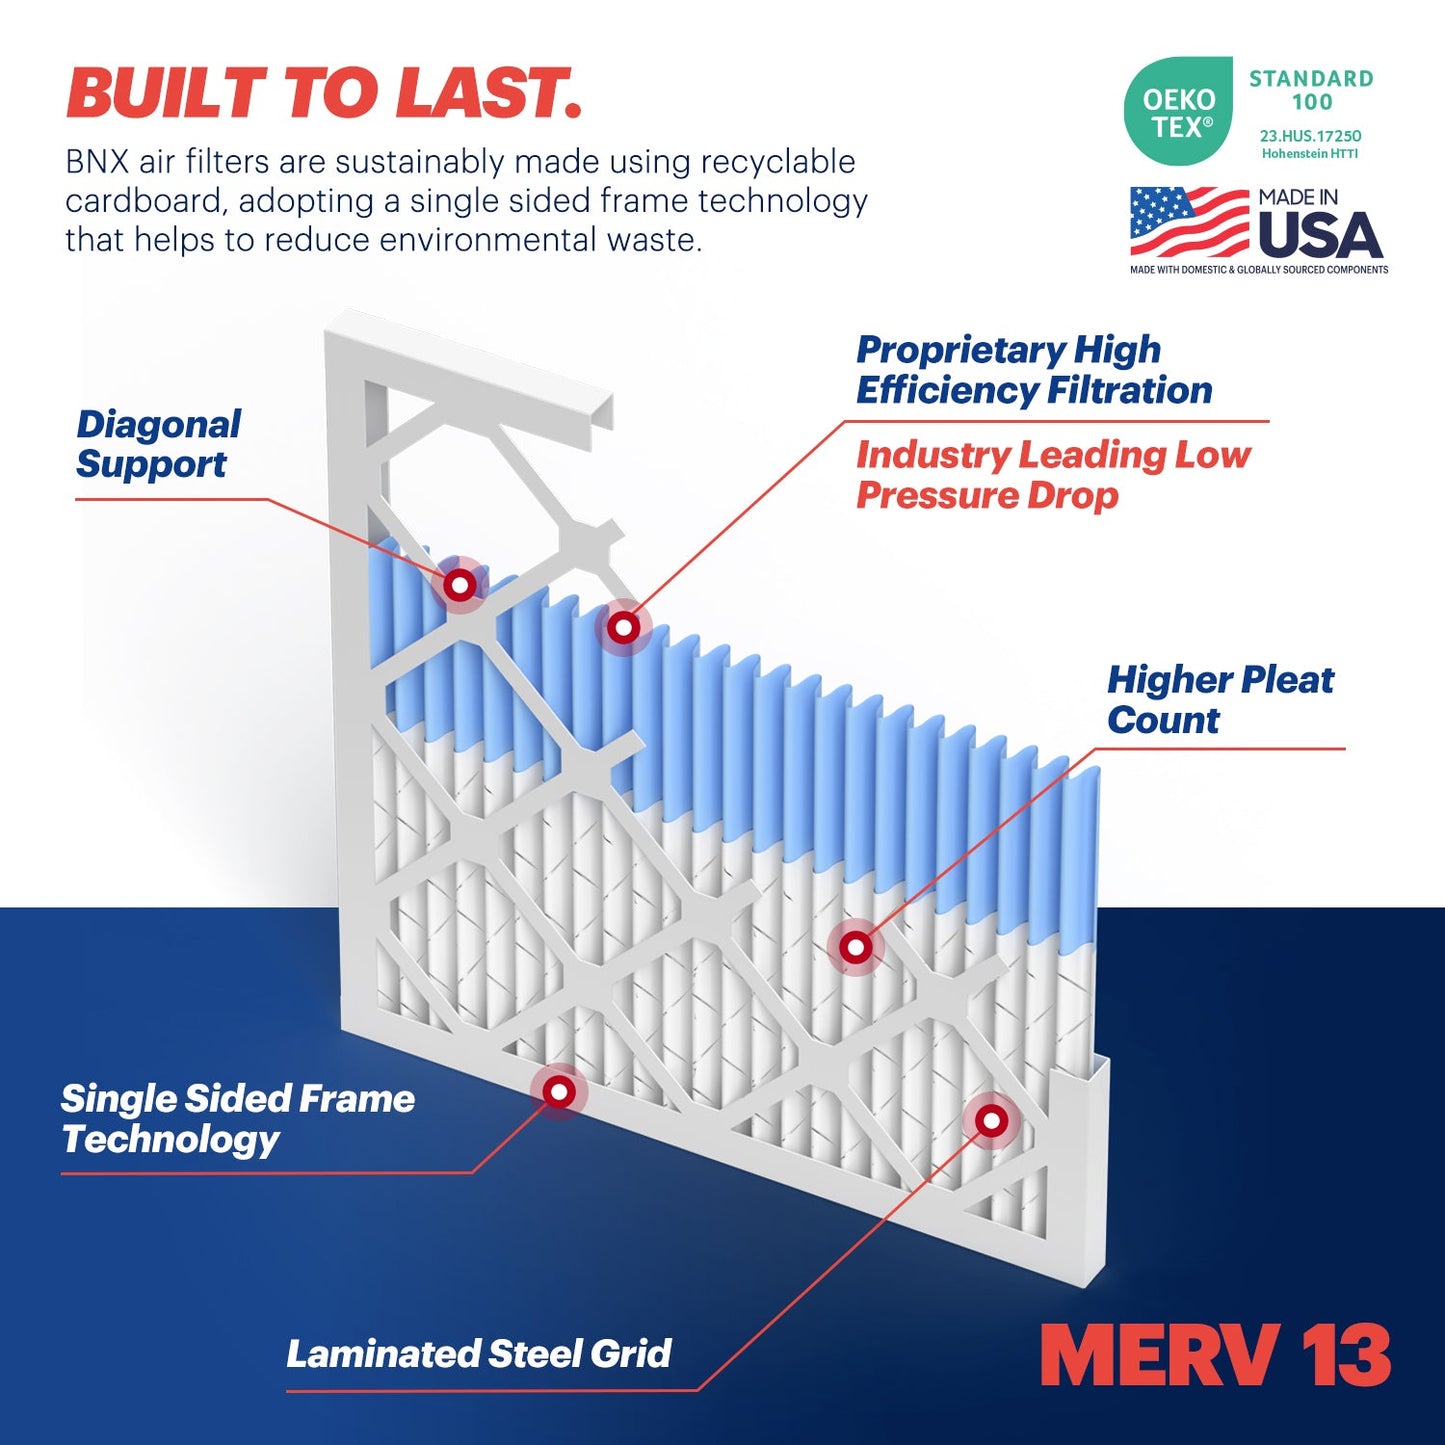 BNX TruFilter 20x20x1 MERV 13 Pleated Air Filter – Made in USA (4-Pack)